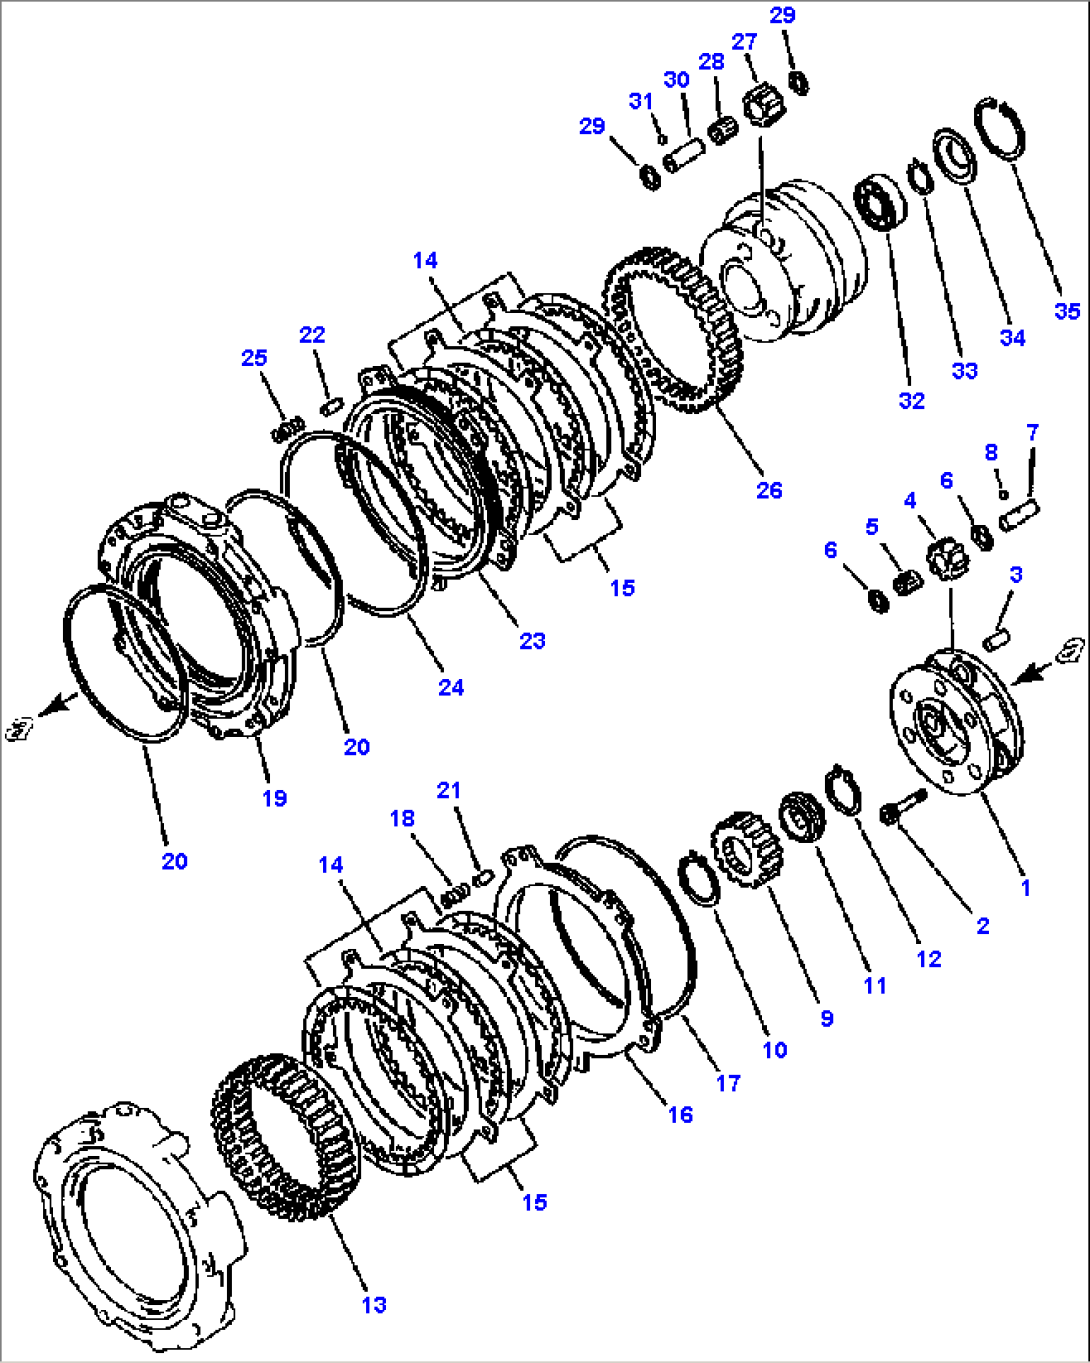 FIG NO. 2512 TRANSMISSION 3rd AND 4th CLUTCH